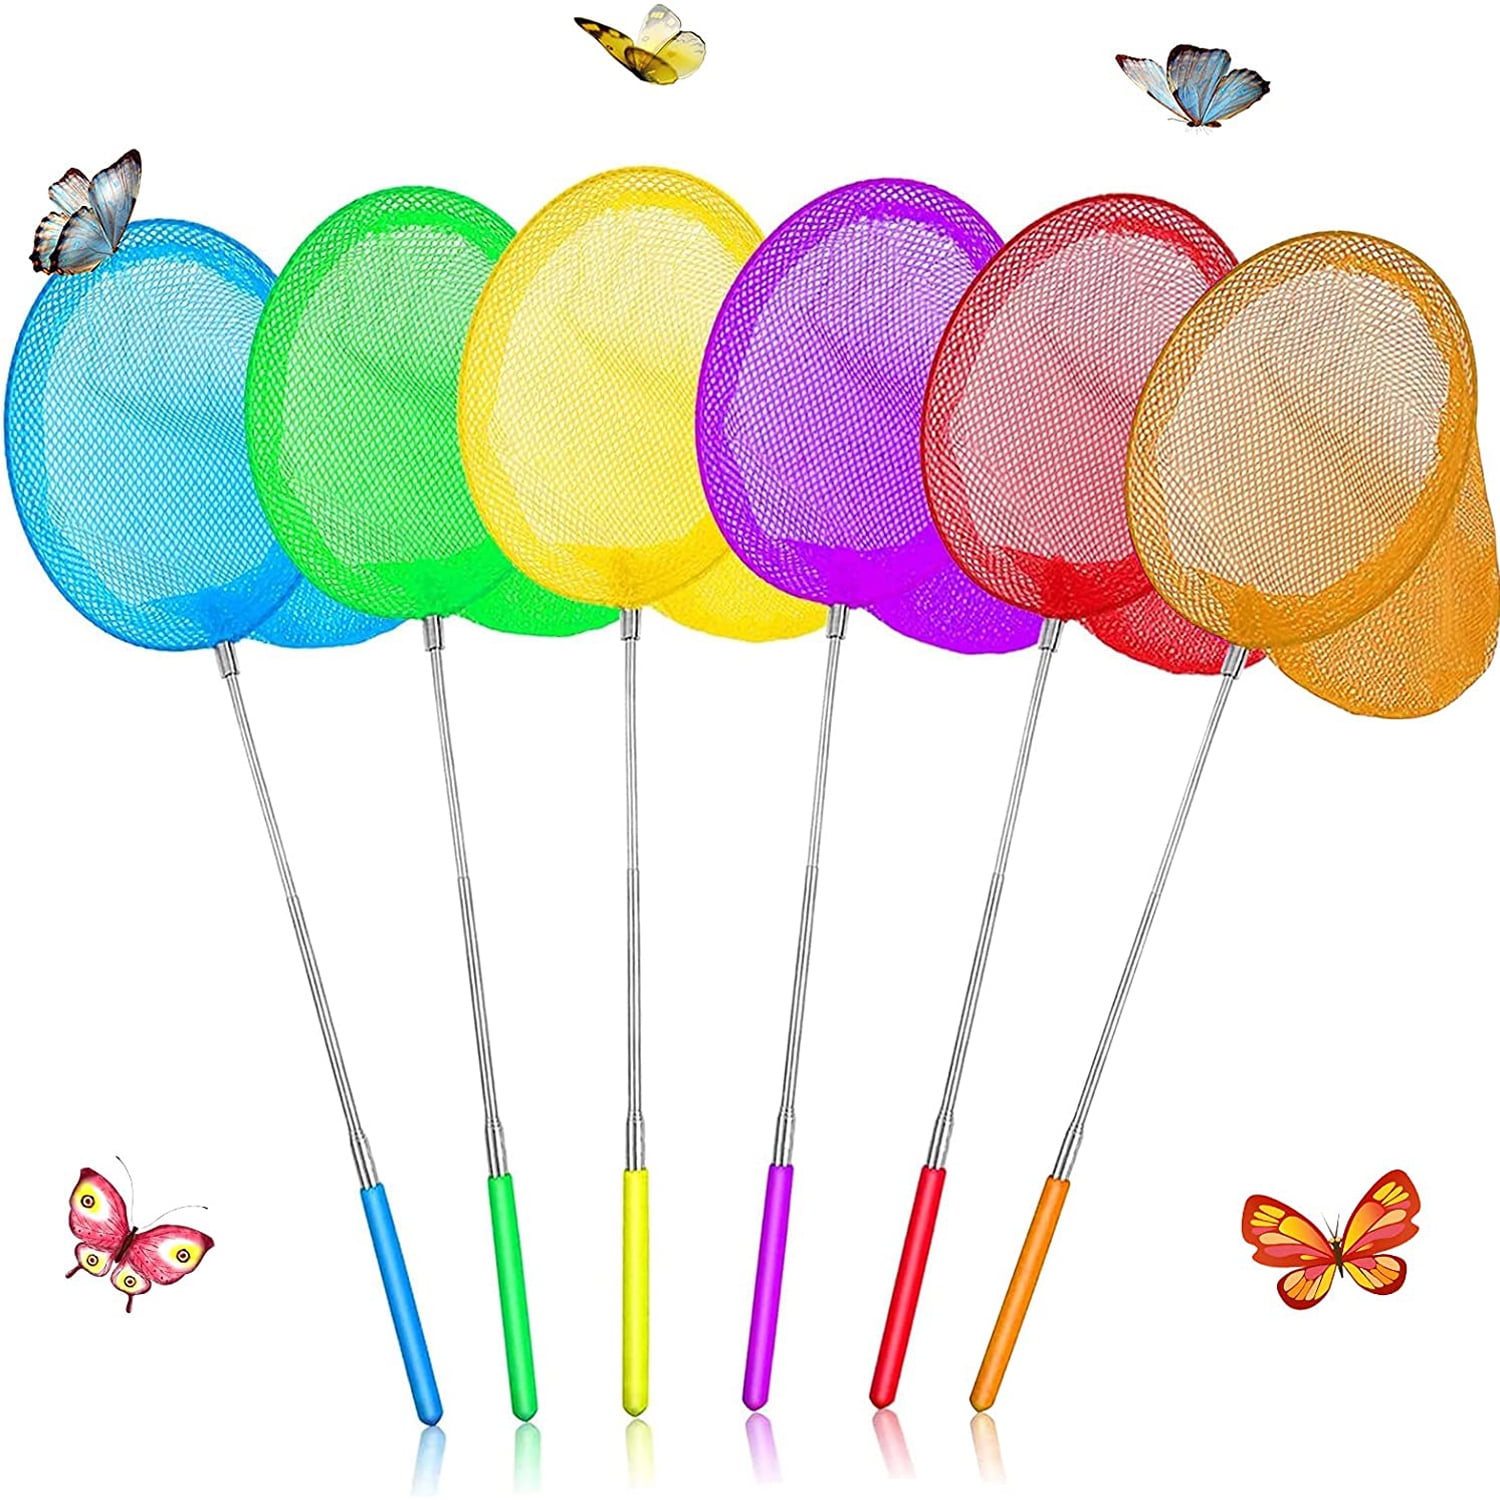 Kids Extendable Butterfly Nets Fishing Nets Catching Insects for Children 